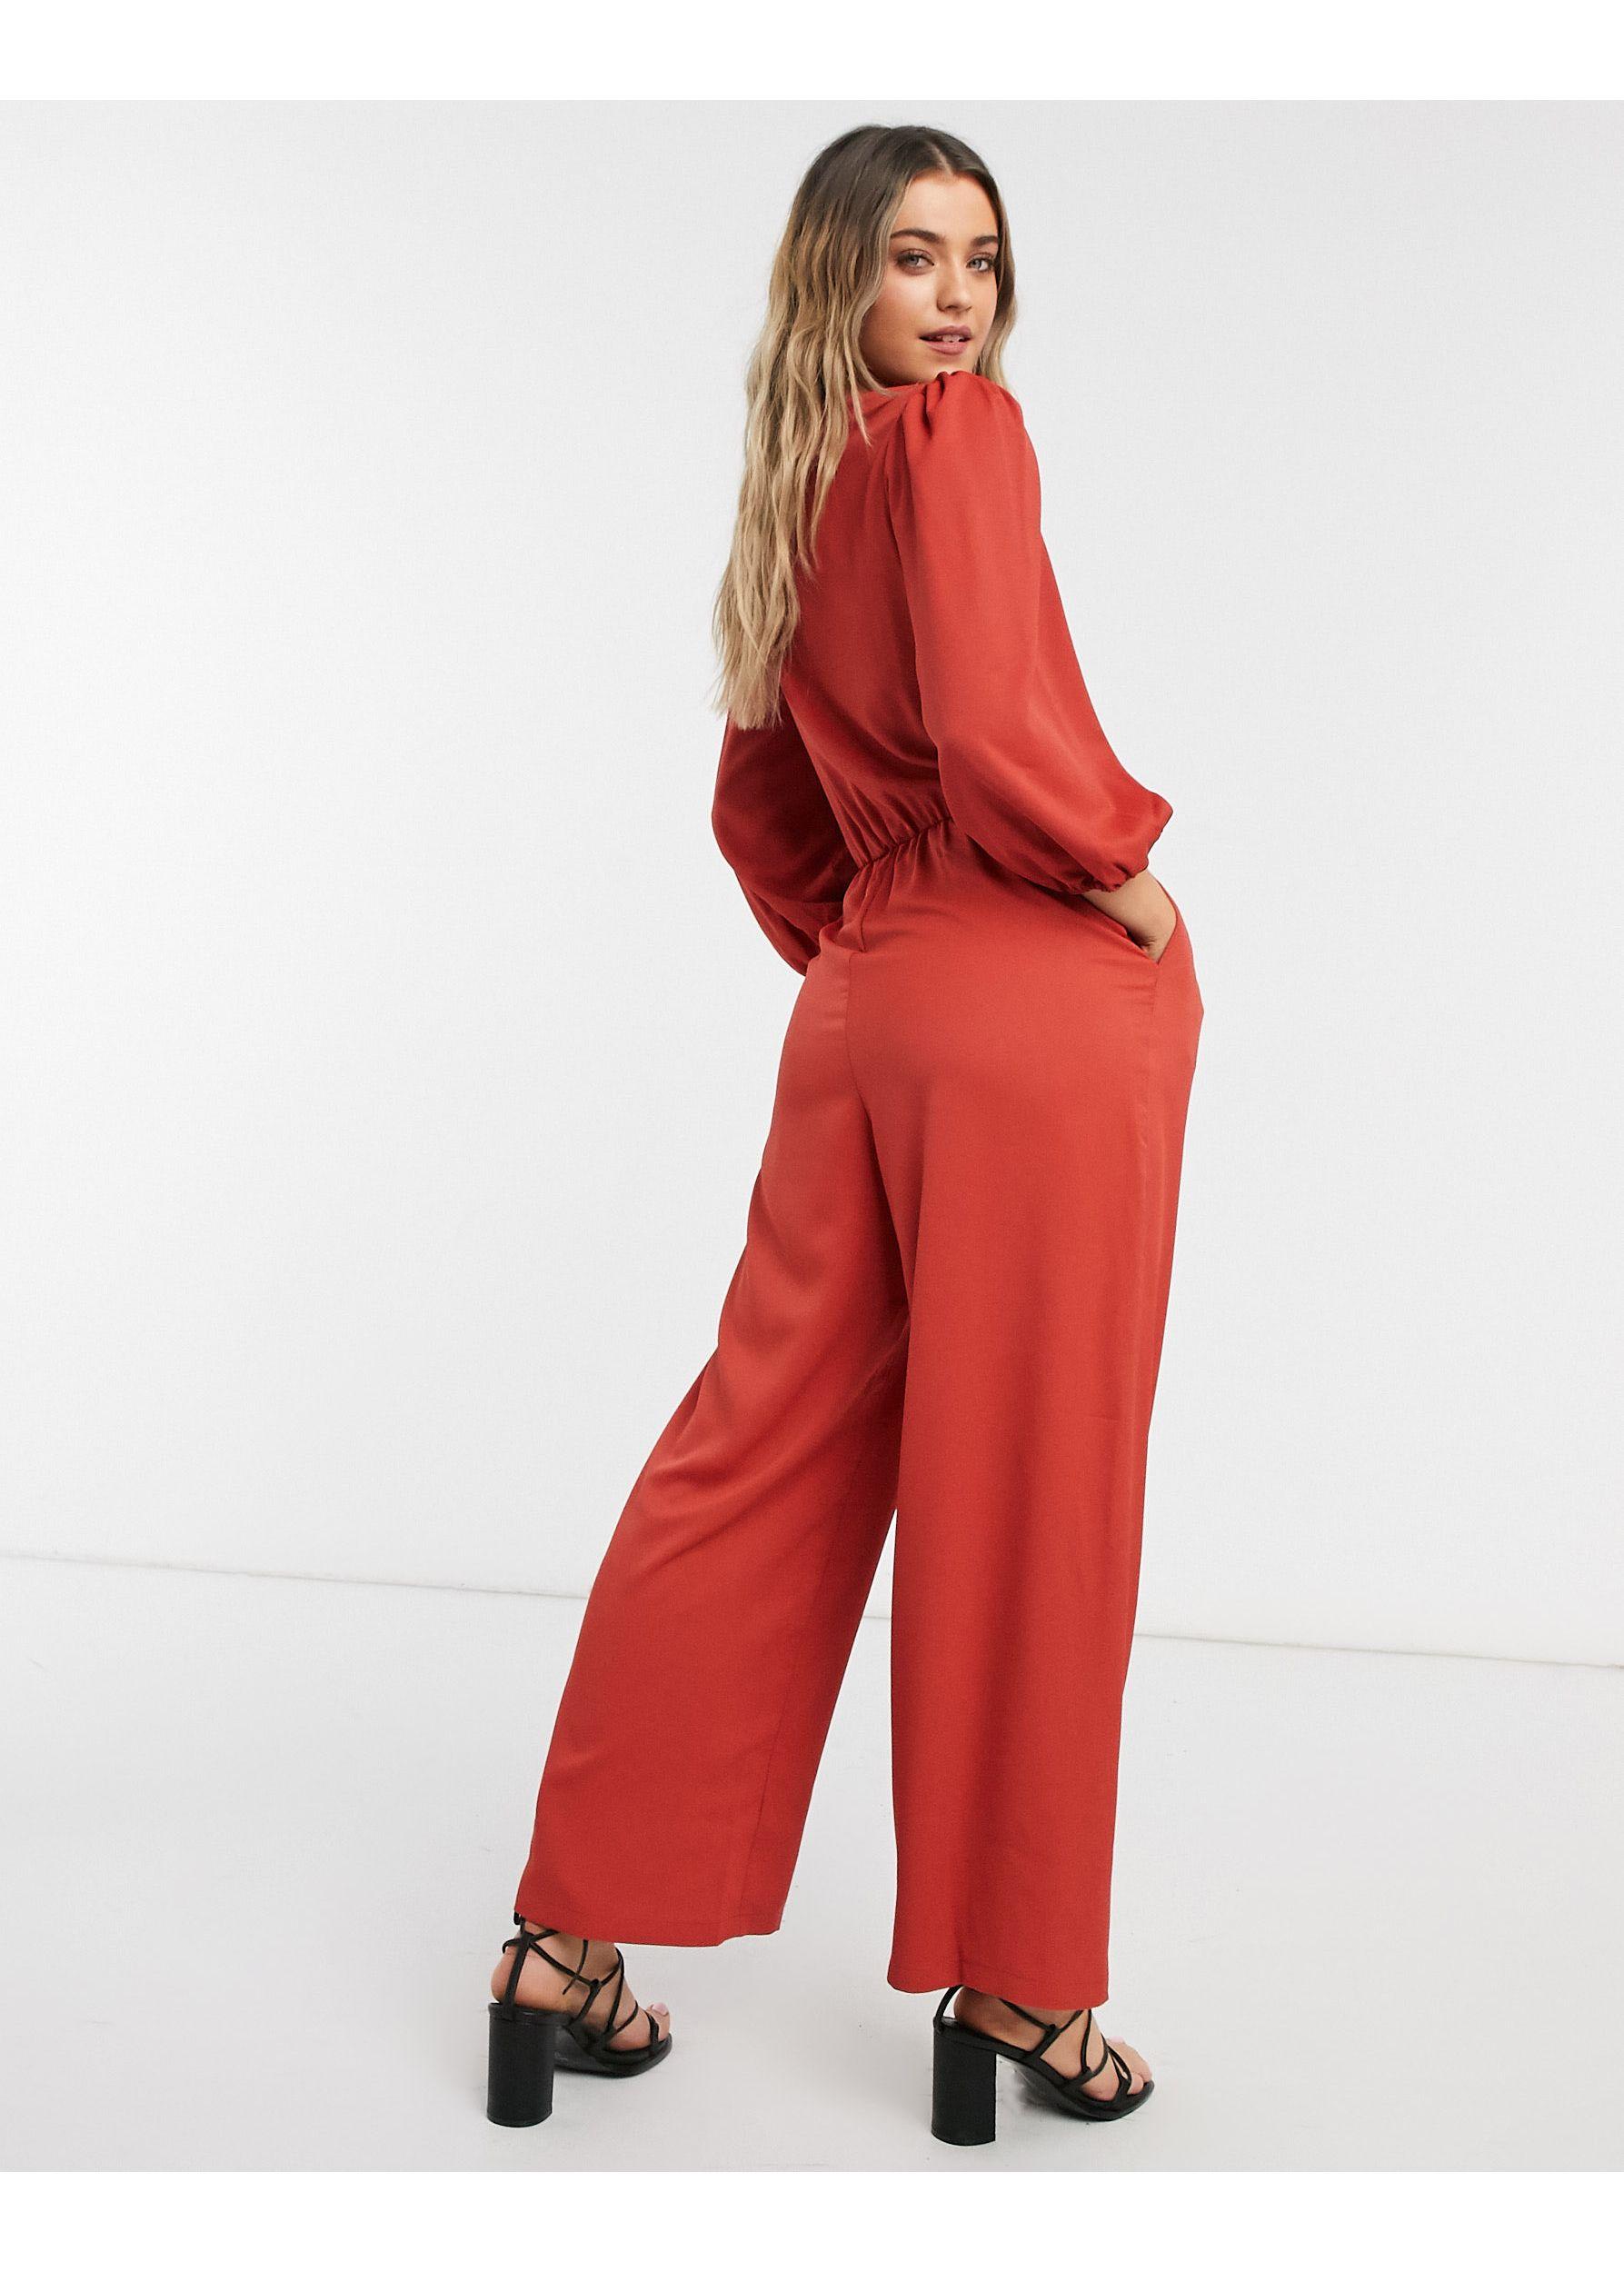 Monki Tia Wrap Front Jumpsuit in Red | Lyst